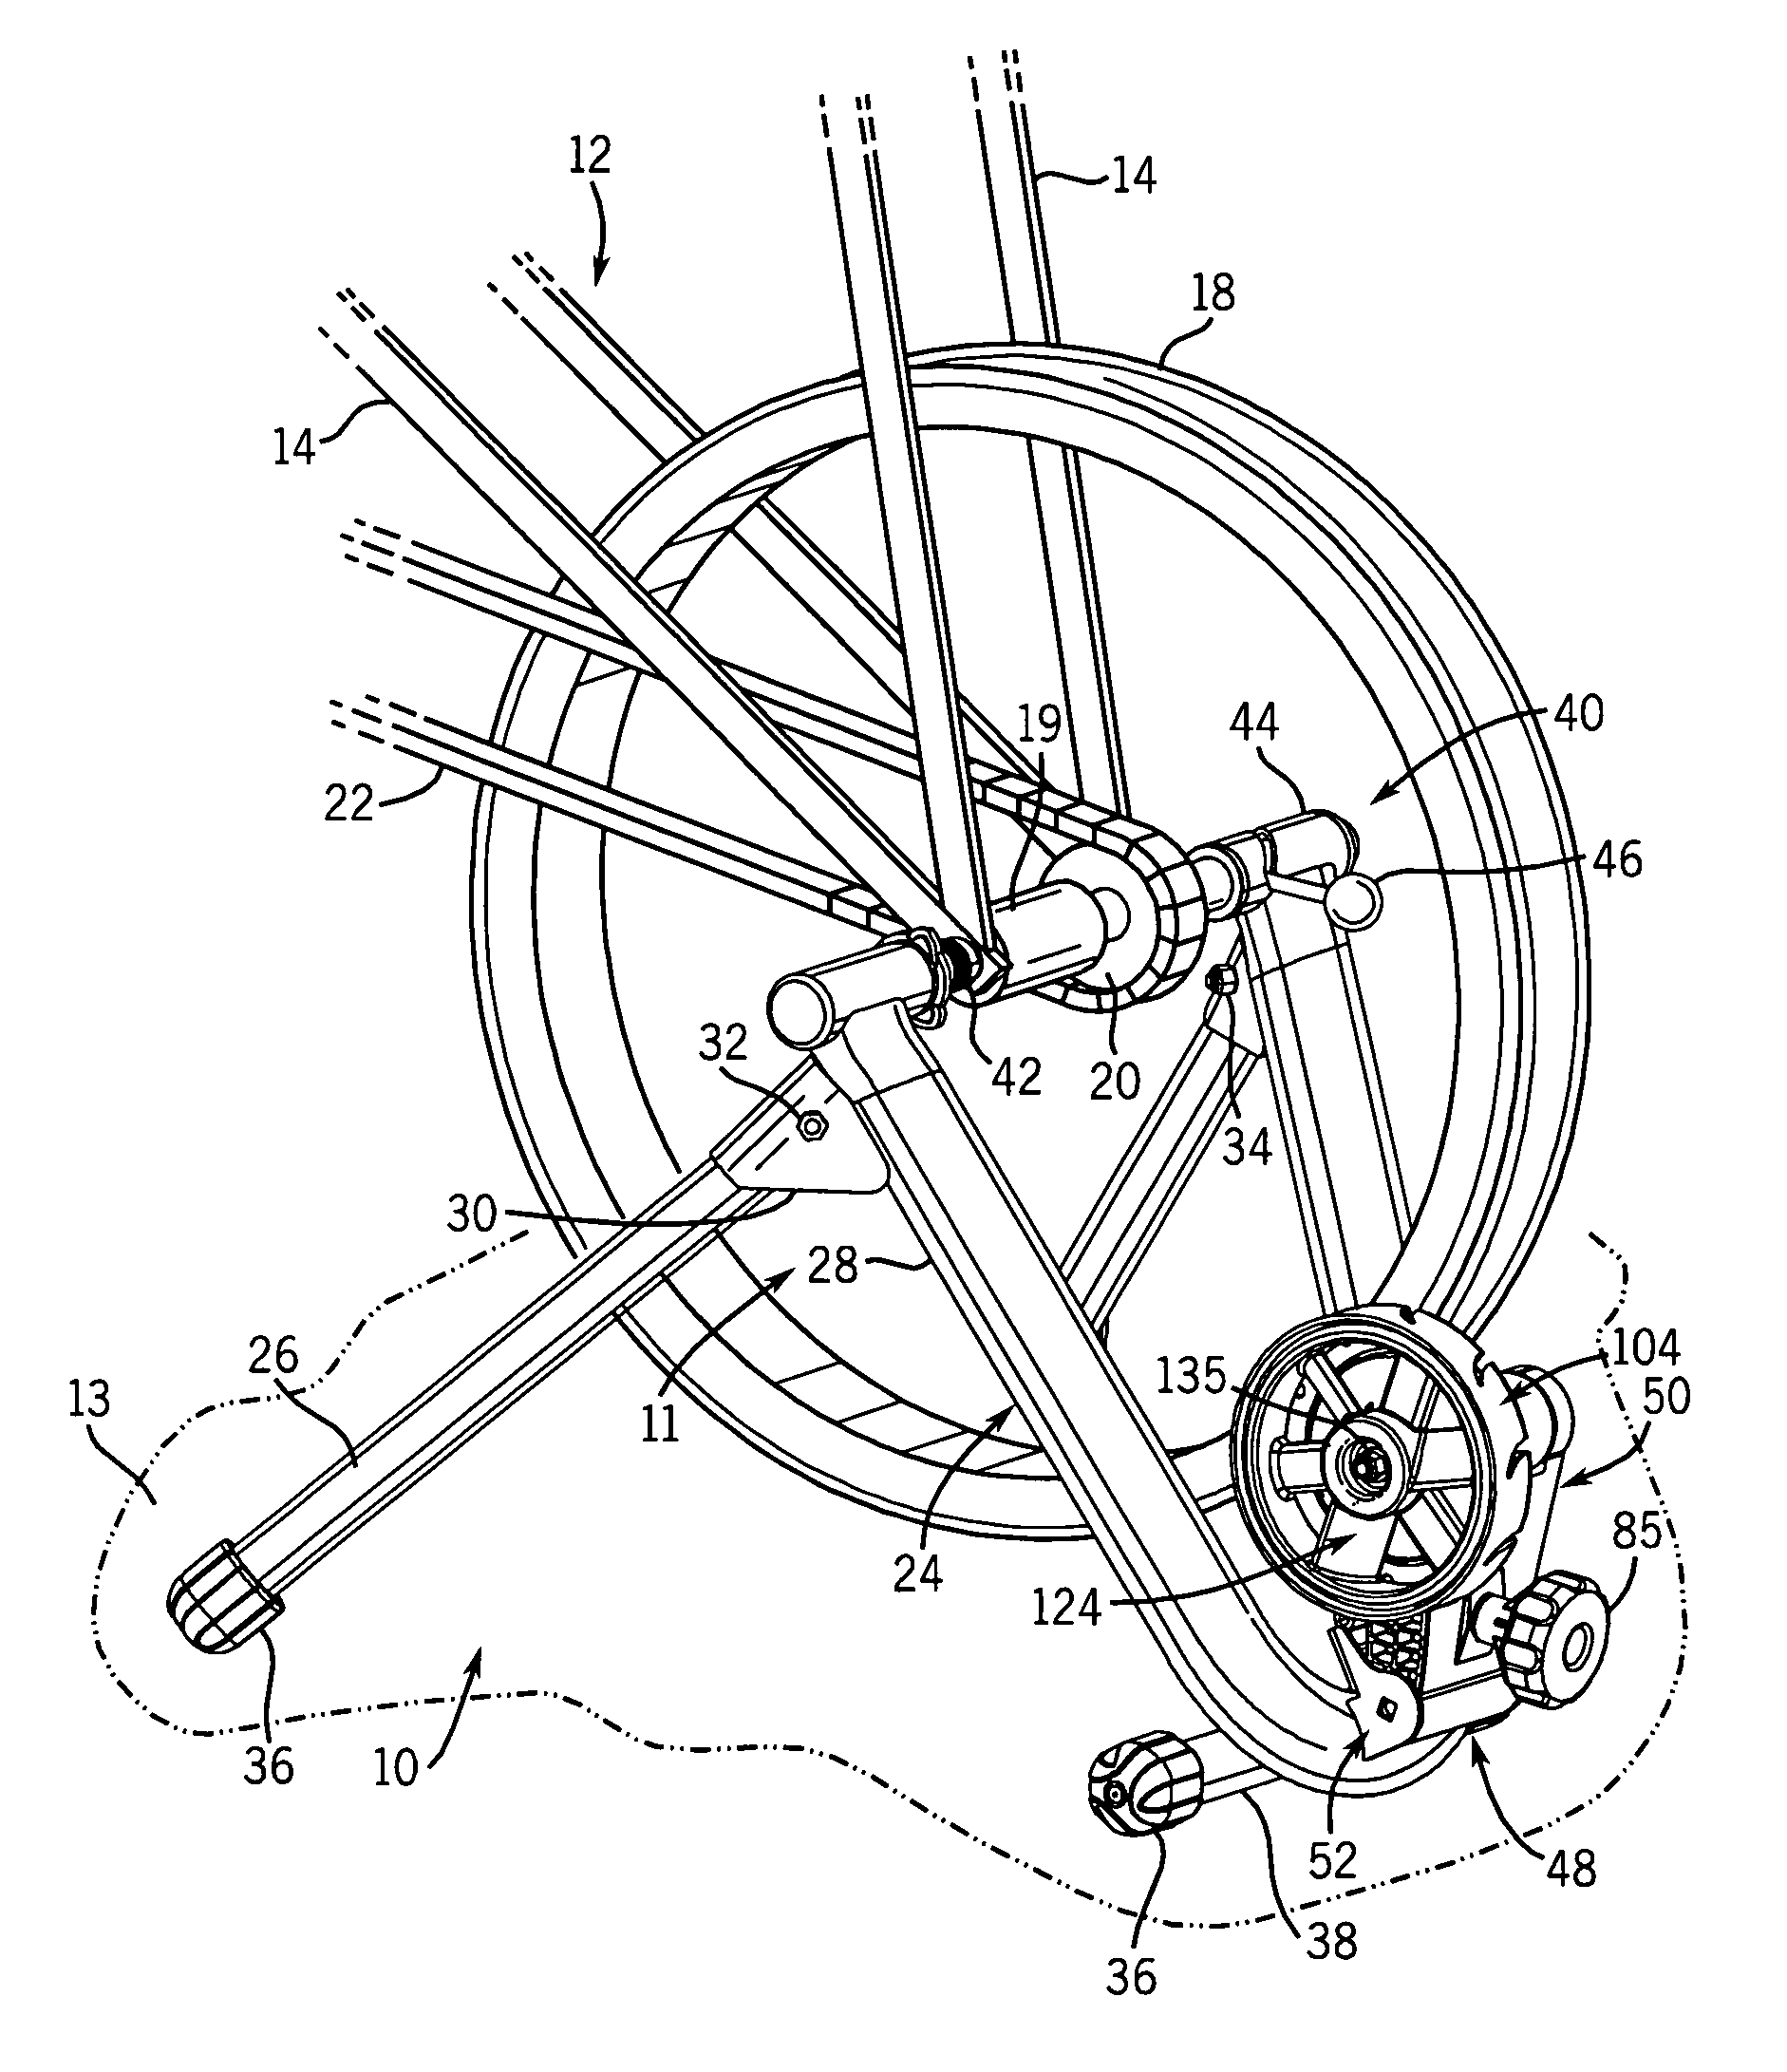 Variable magnetic resistance unit for an exercise device